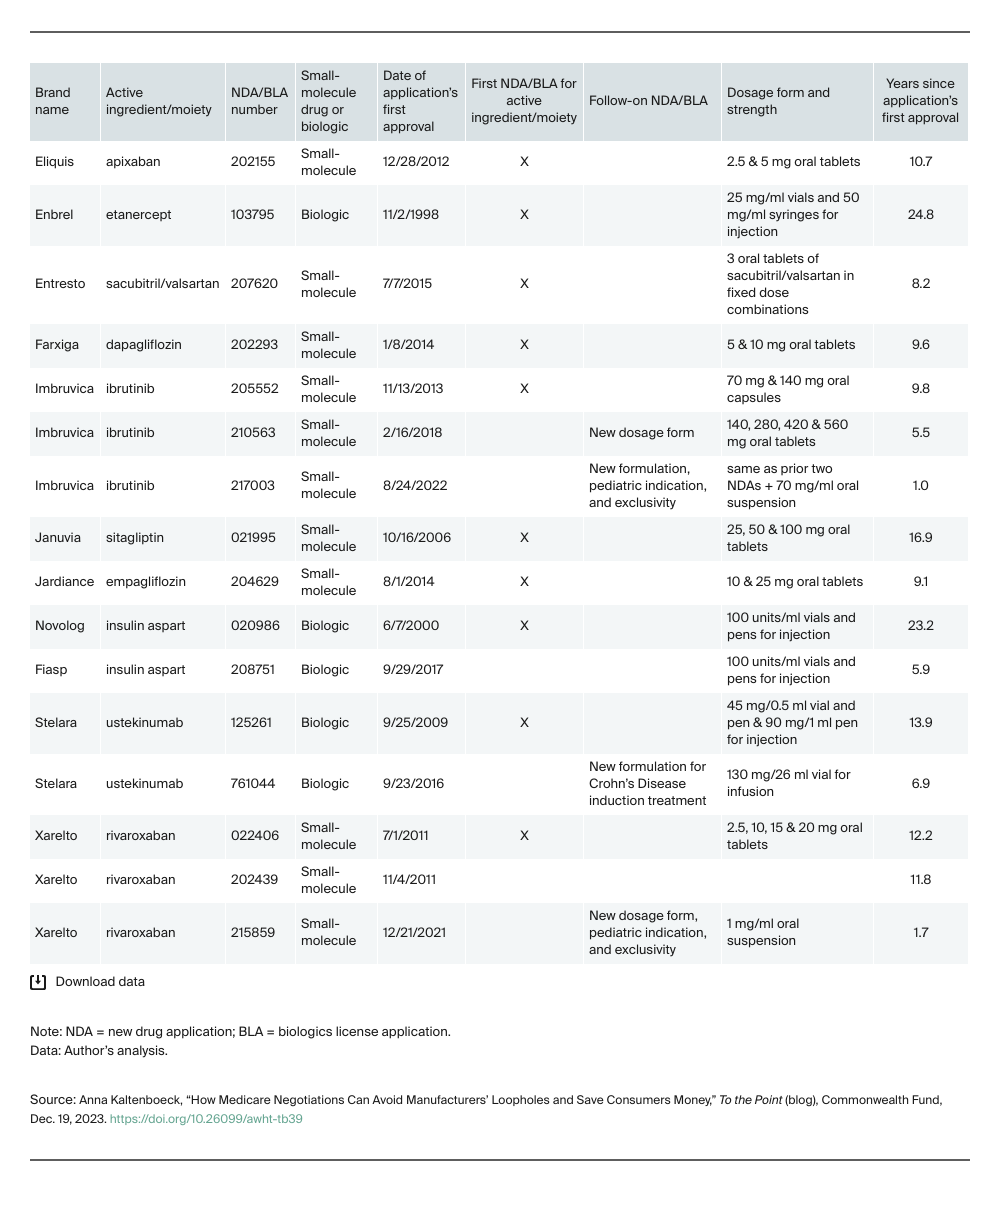 Table, listing drug brands and the changes and patent approvals